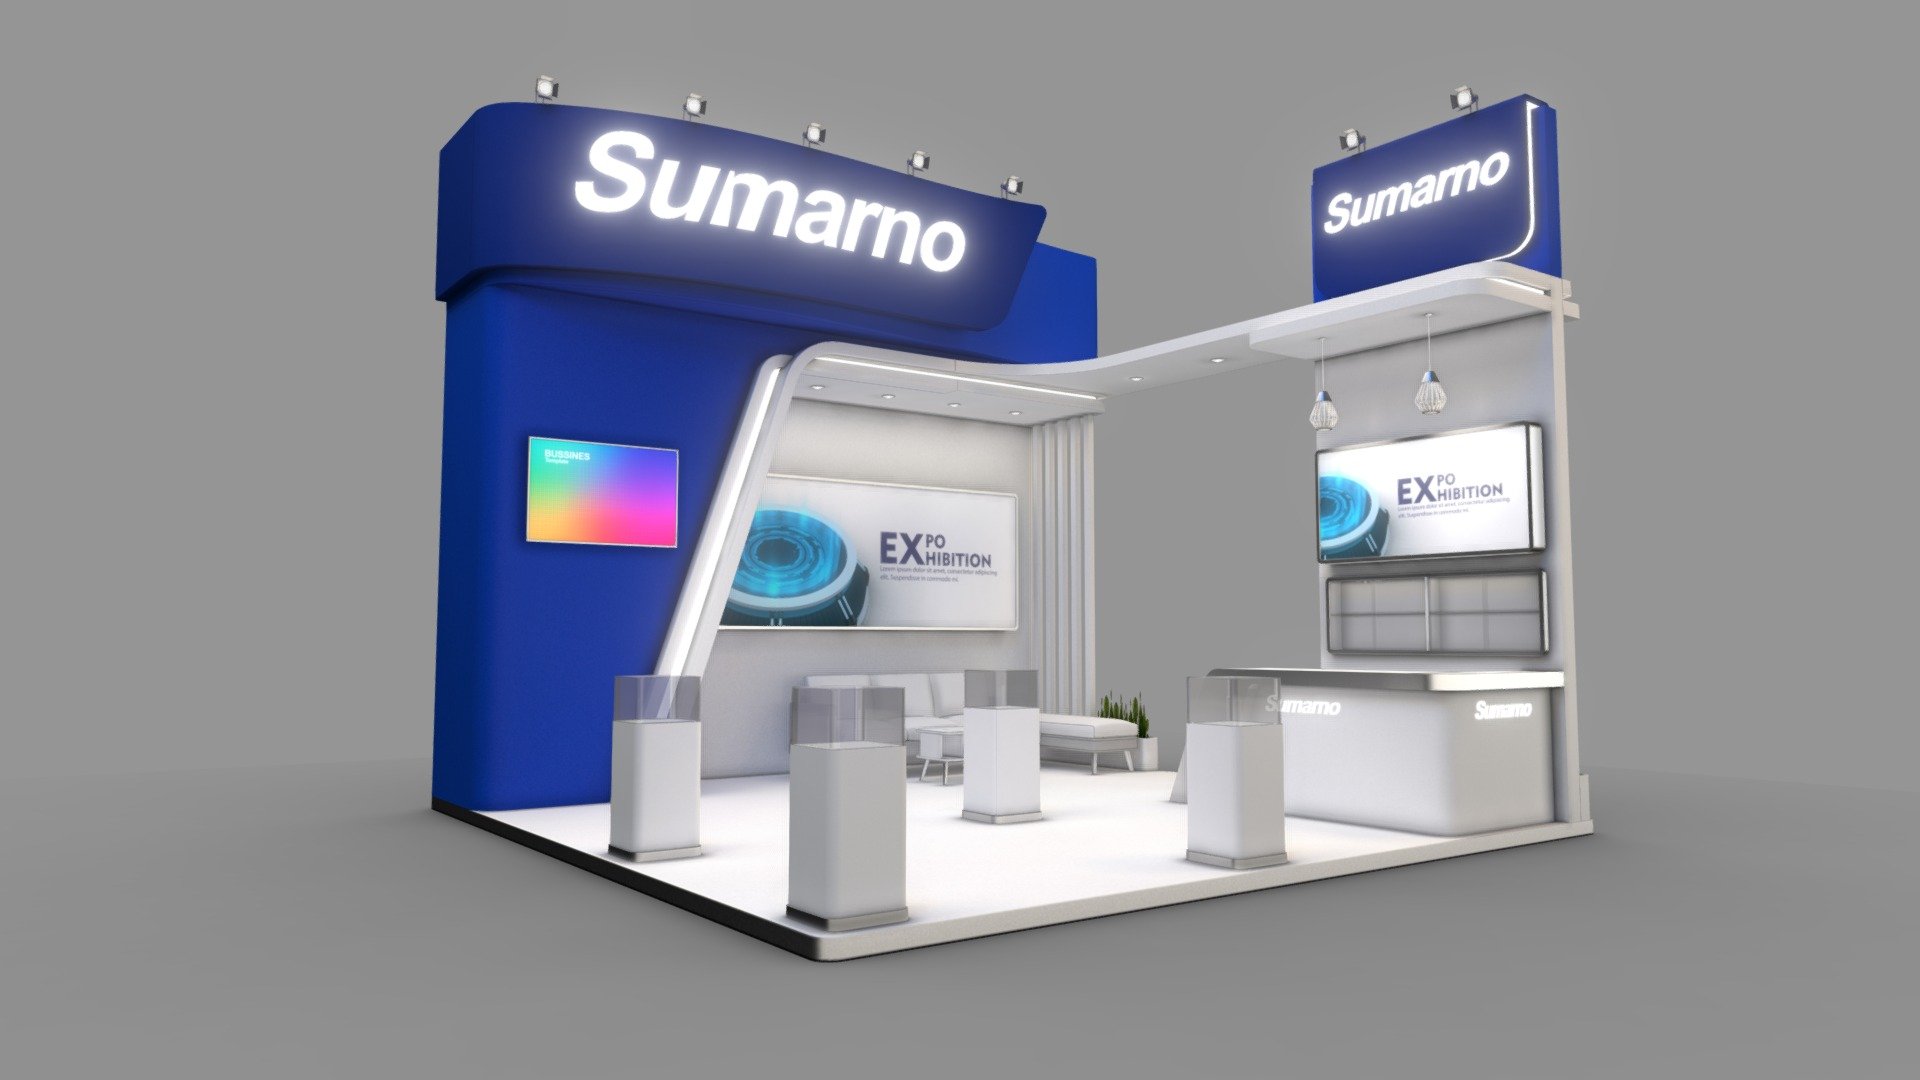 Virtual Booth
Exhibition stand design 3d model
6x6m / 36 Sqm / 3 Exposed sides / max Height: 5.2m

Format Conversion:
1. Autodesk 3Ds max 2018 / V ray 3.60.03 (Native)
2. Autodesk 3Ds max 2015 / Default scanline
3. Fbx Format
4. Obj Format - EXHIBITION STAND OQ 36 Sqm - Buy Royalty Free 3D model by fasih.lisan 3d model